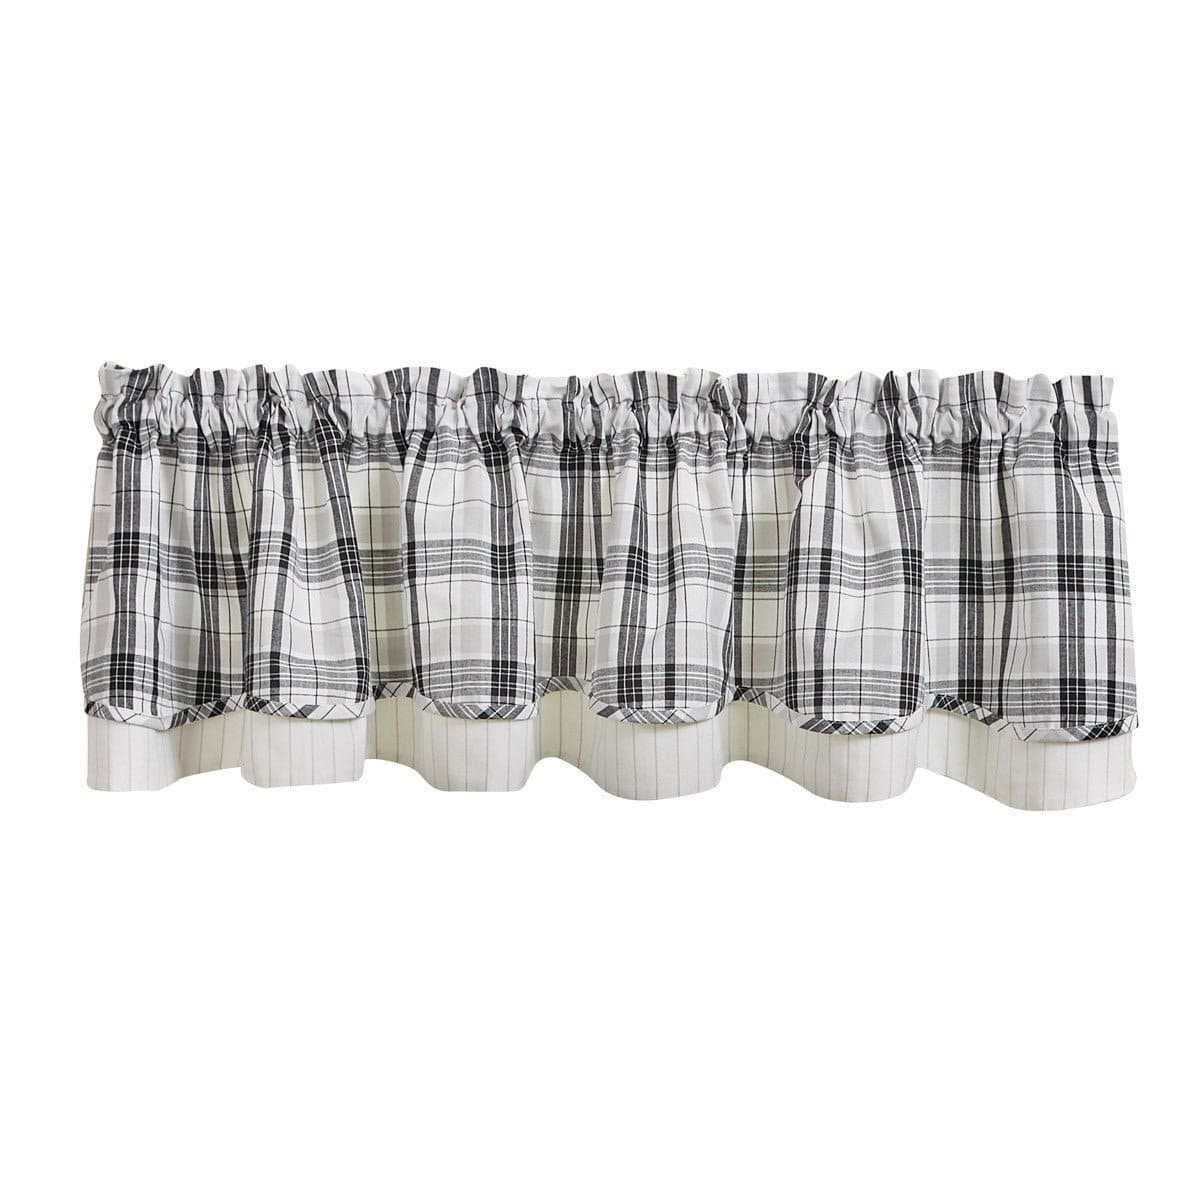 Refined Rustic Layered Valance Lined-Park Designs-The Village Merchant